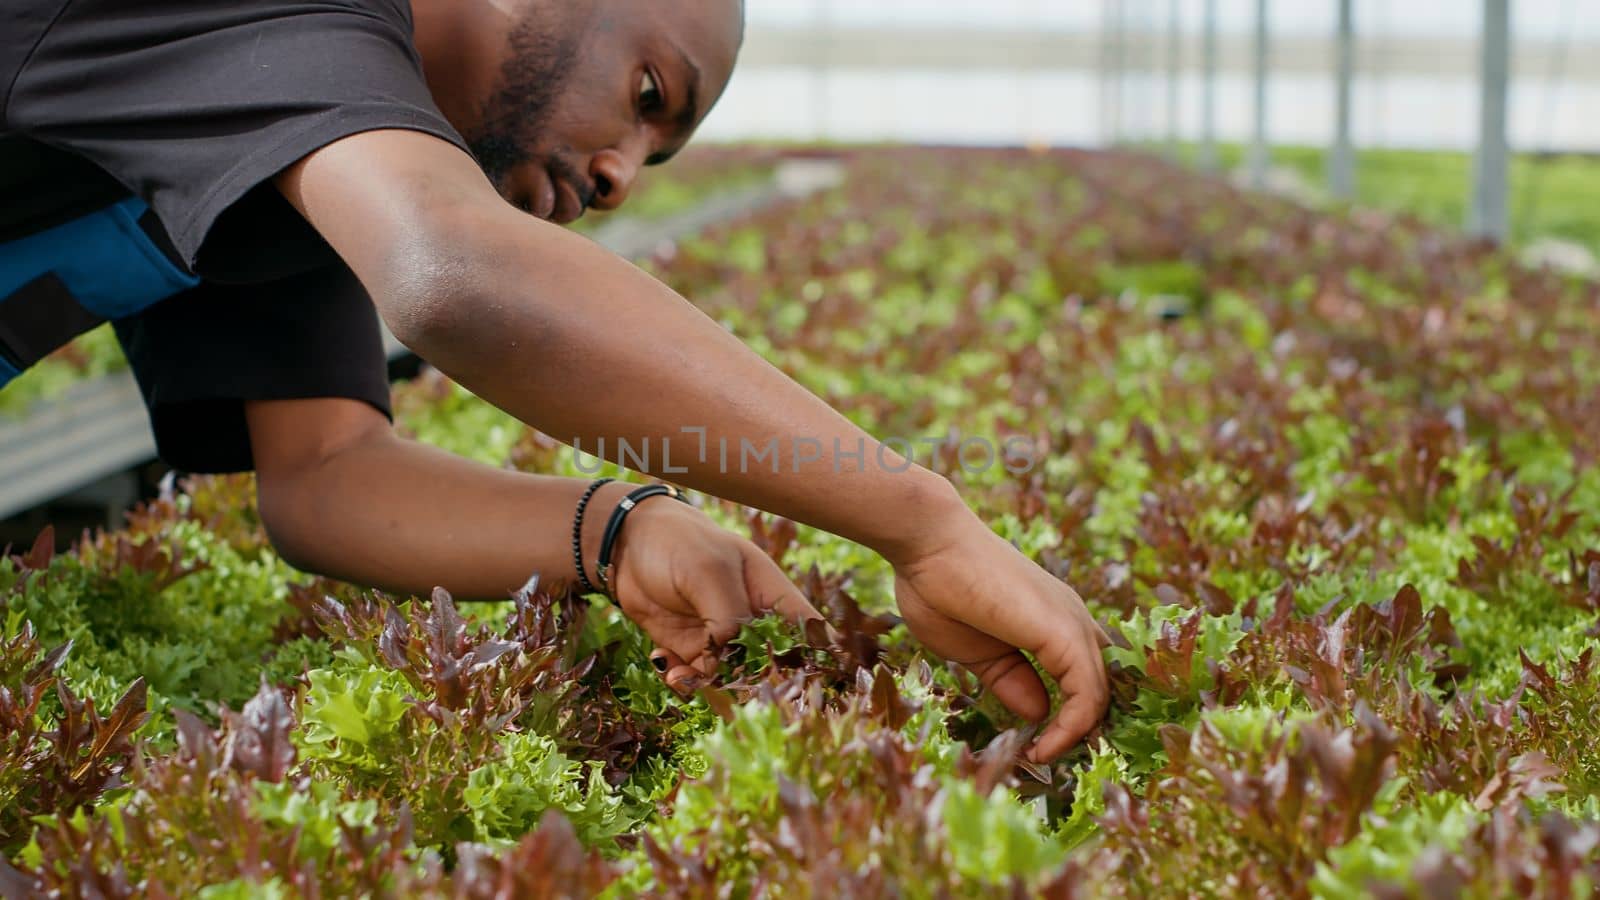 Closeup on african american man hands inspecting plants doing quality control looking at seedlings for damaged leaves. Organic farm worker inspecting bio lettuce sprouts for best quality crops.